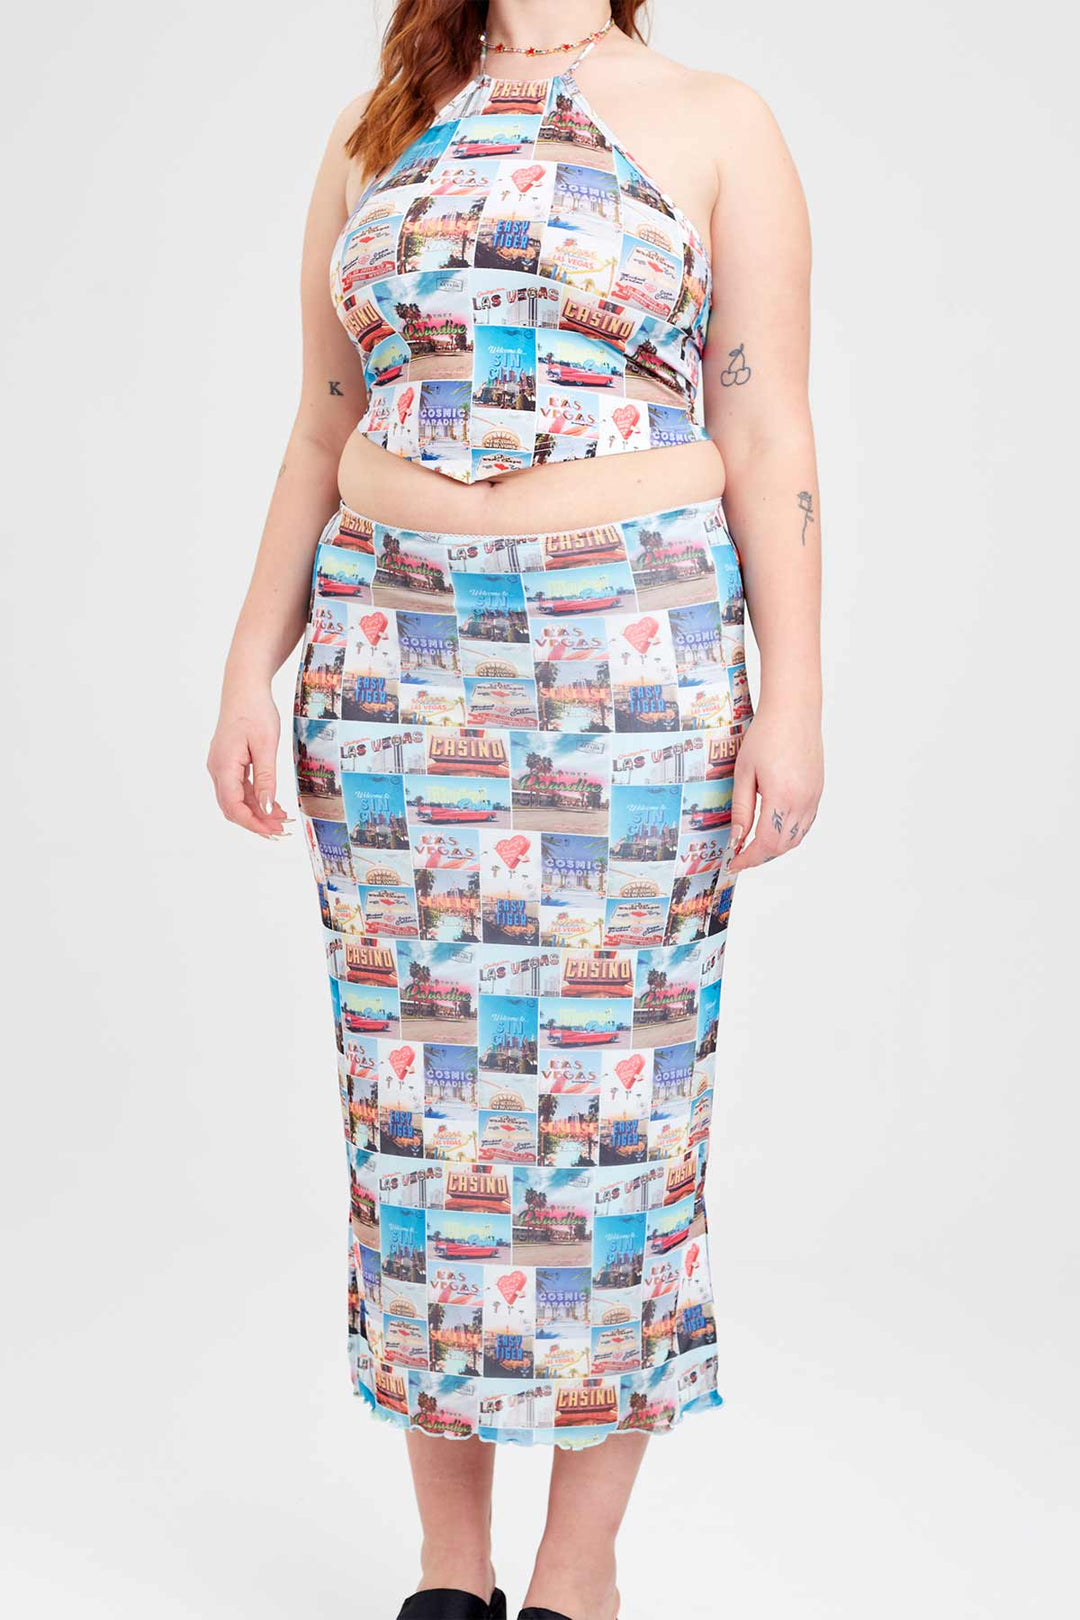 Wish You Were Here Mesh Skirt - Easy Tiger